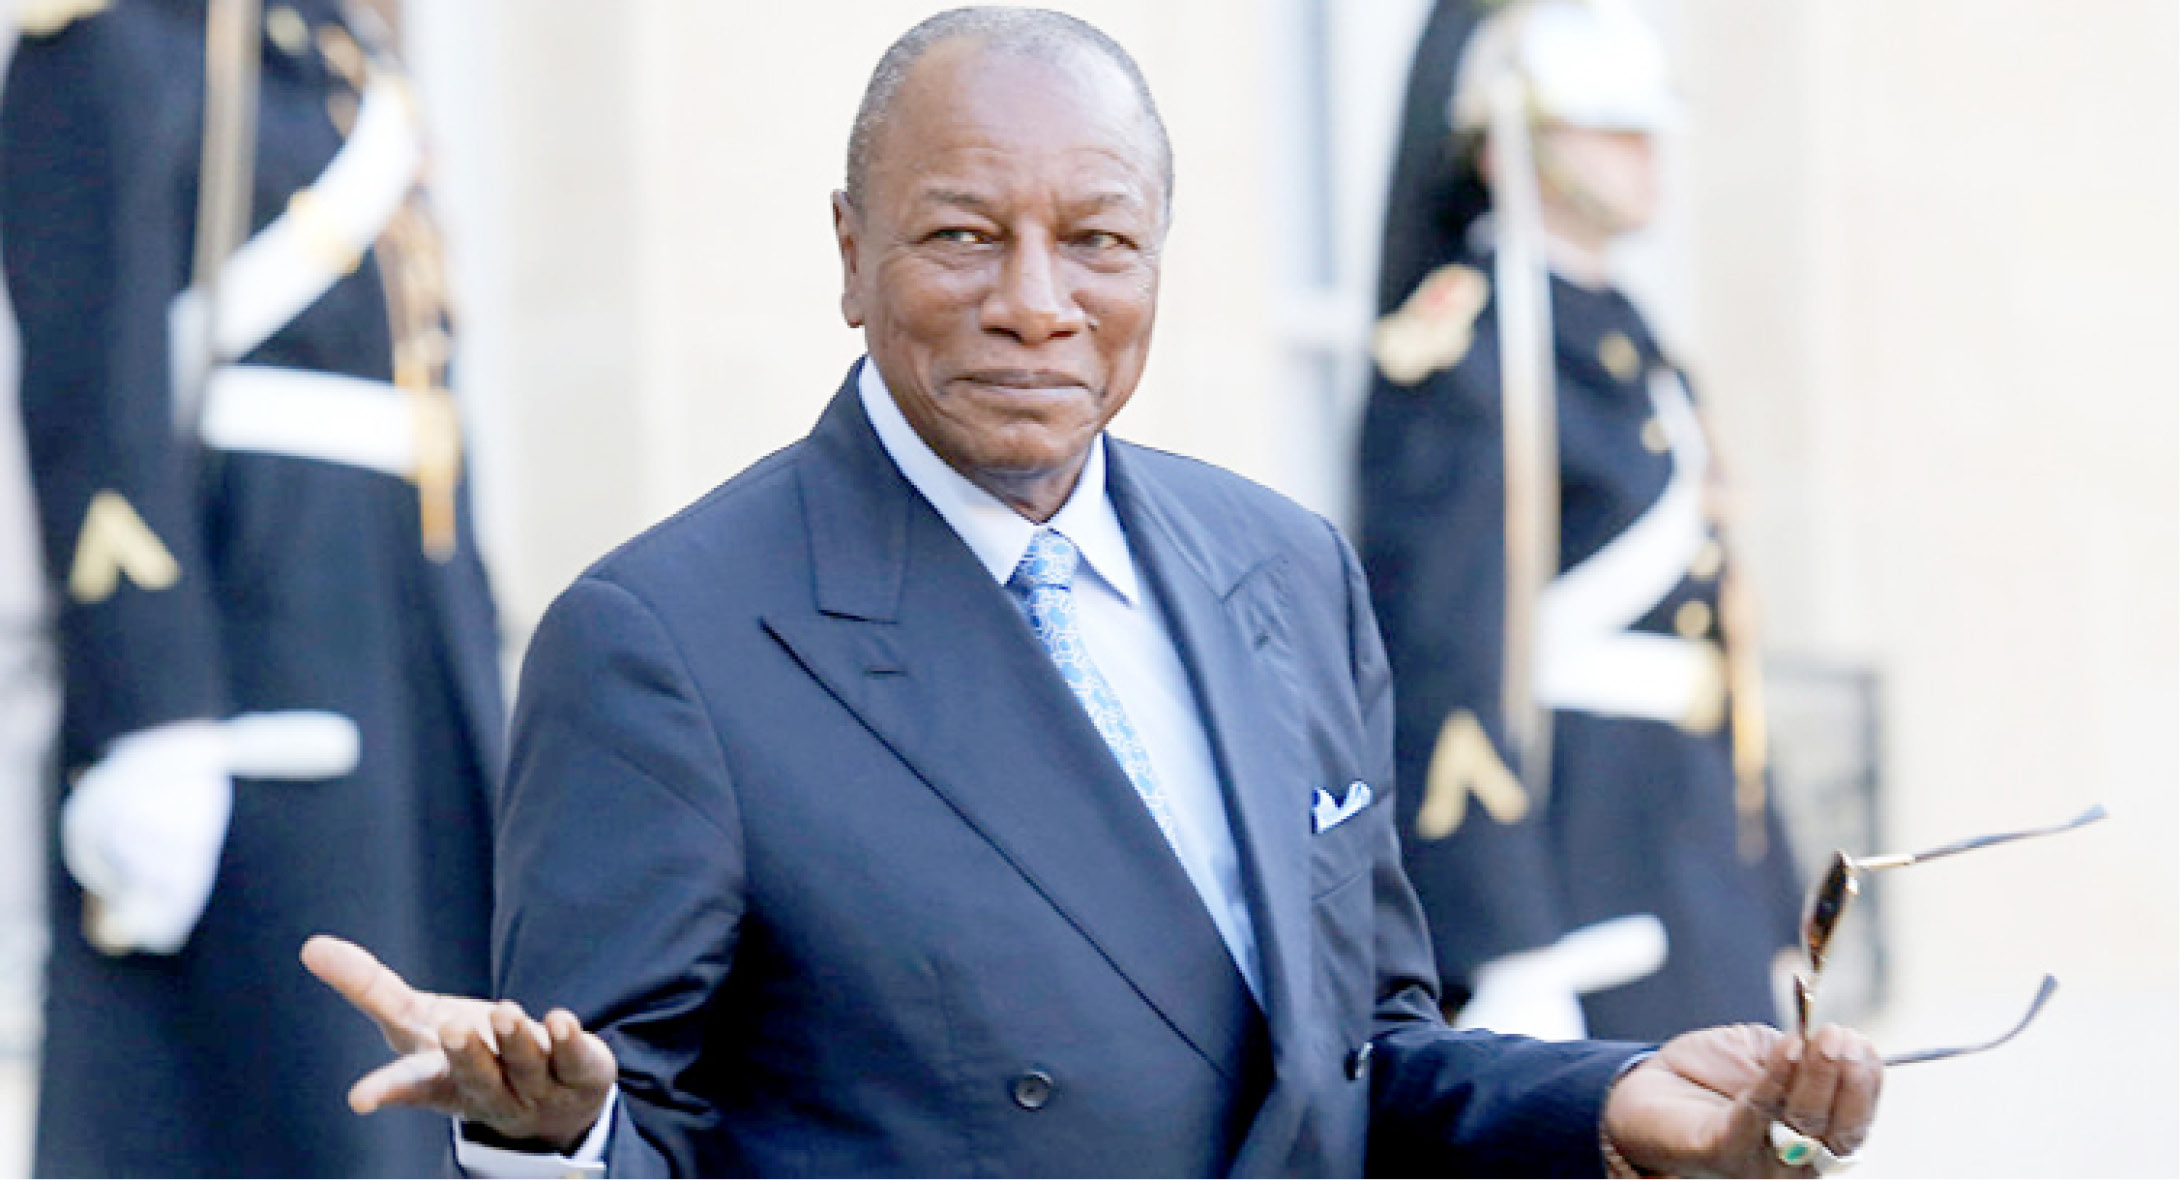 Guinea’s President Alpha Conde is currently serving his second and, under the 2010 Constitution